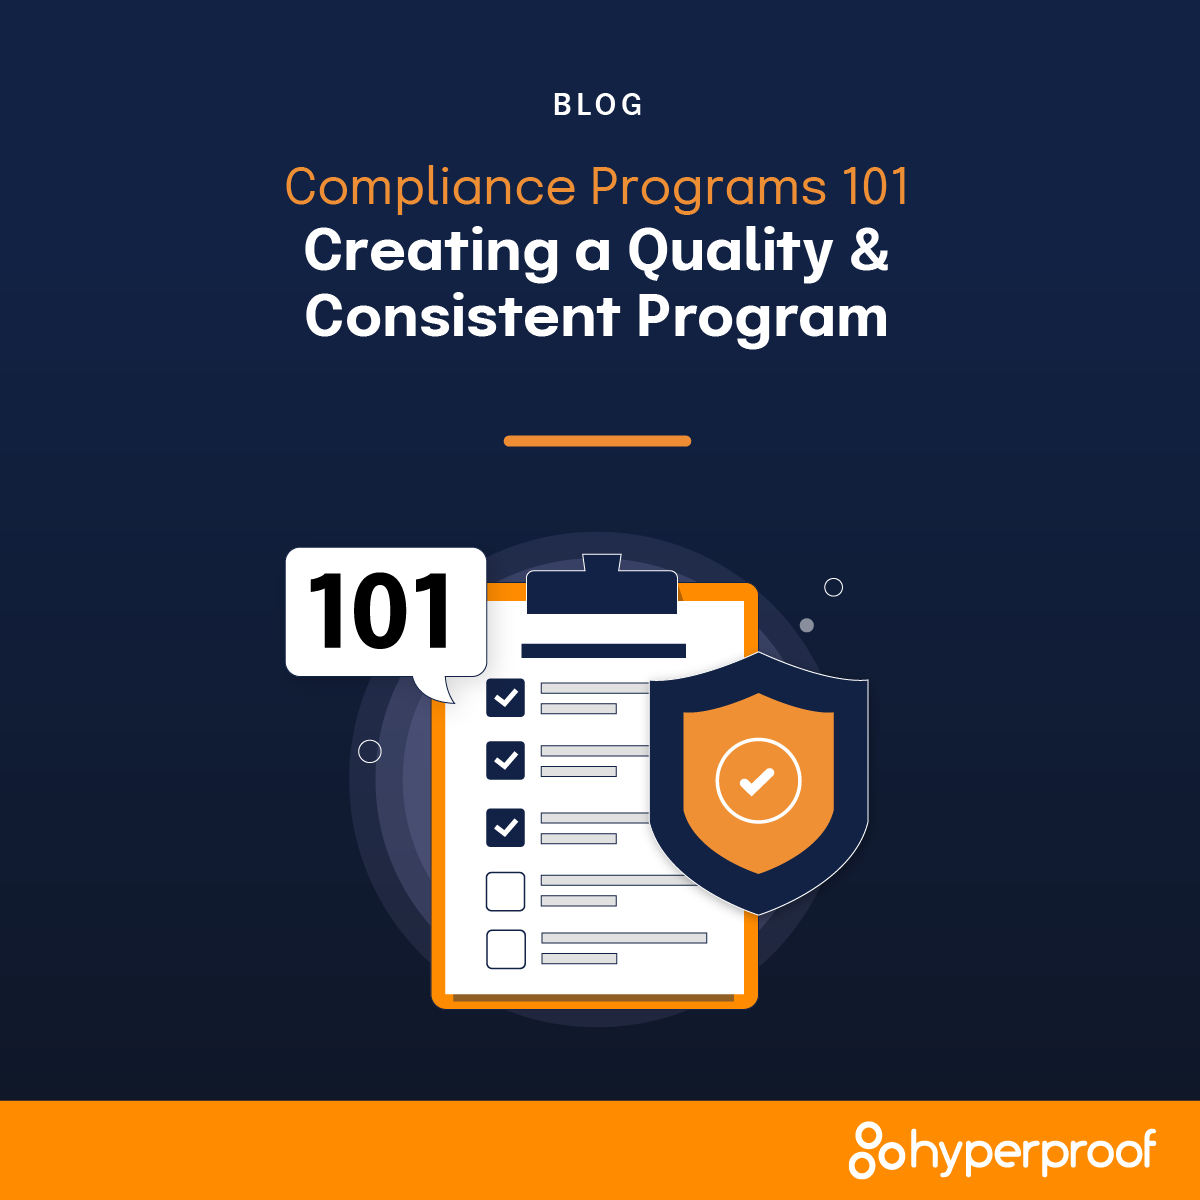 It's time for Compliance Programs 101! In this blog post, we cover the four elements of an effective compliance program. Plus, learn how to build a checklist for your compliance program: okt.to/Ml7cm5

#compliance #compliancejourney #complianceprogram #grc